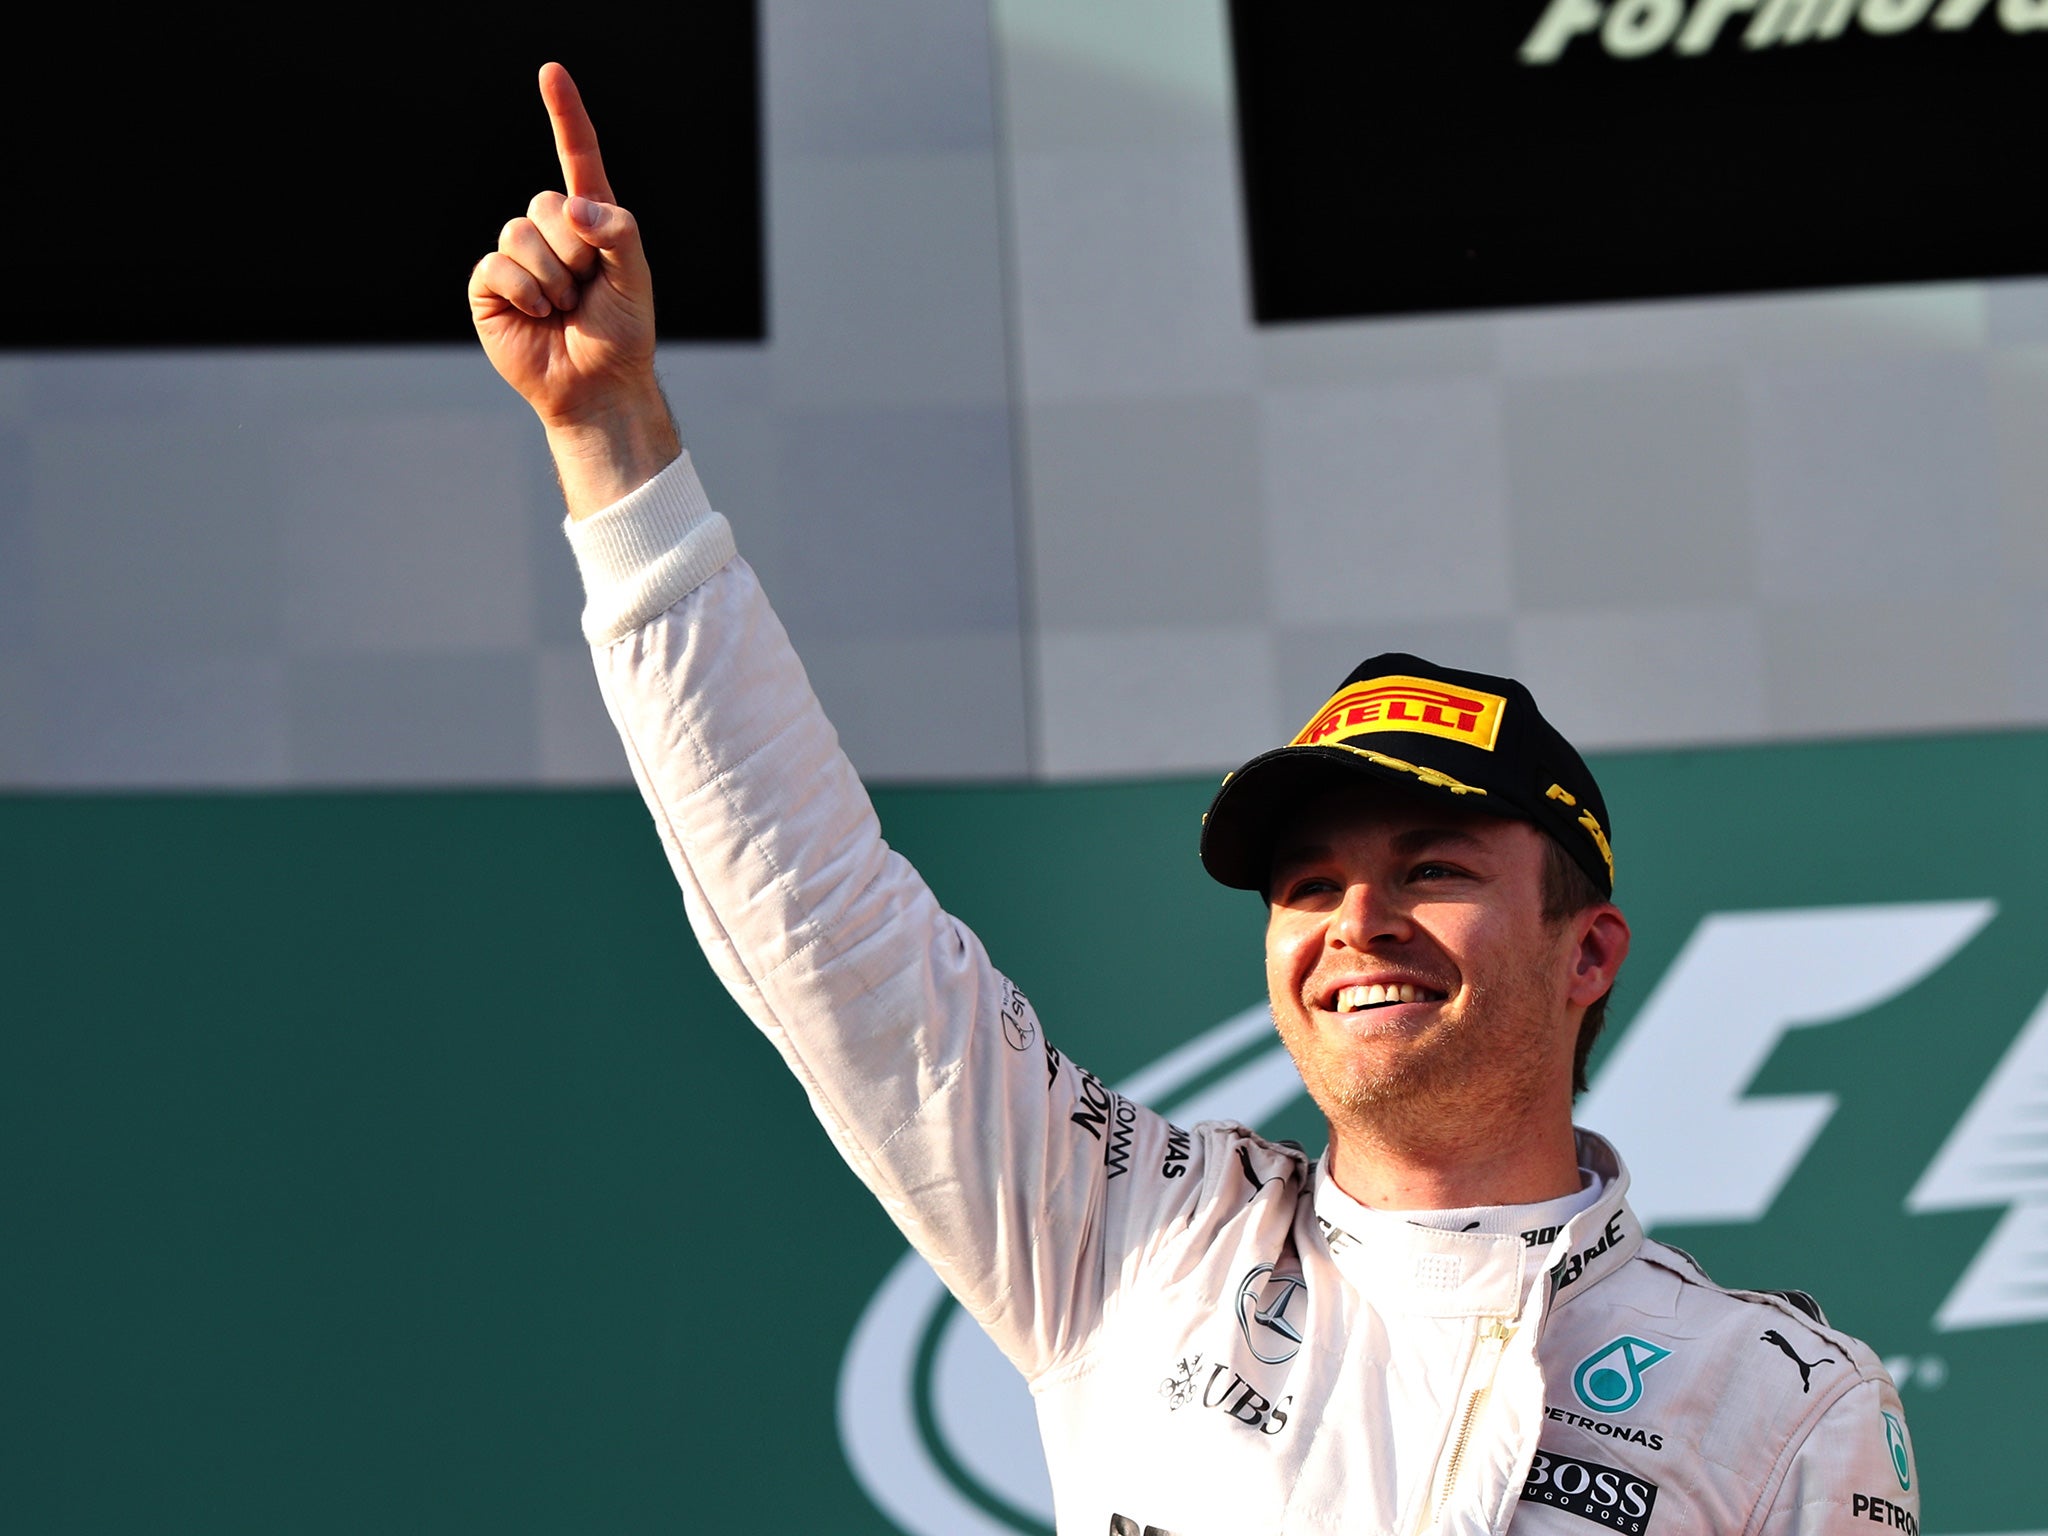 Rosberg took advantage of his rival's penalty and claimed pole